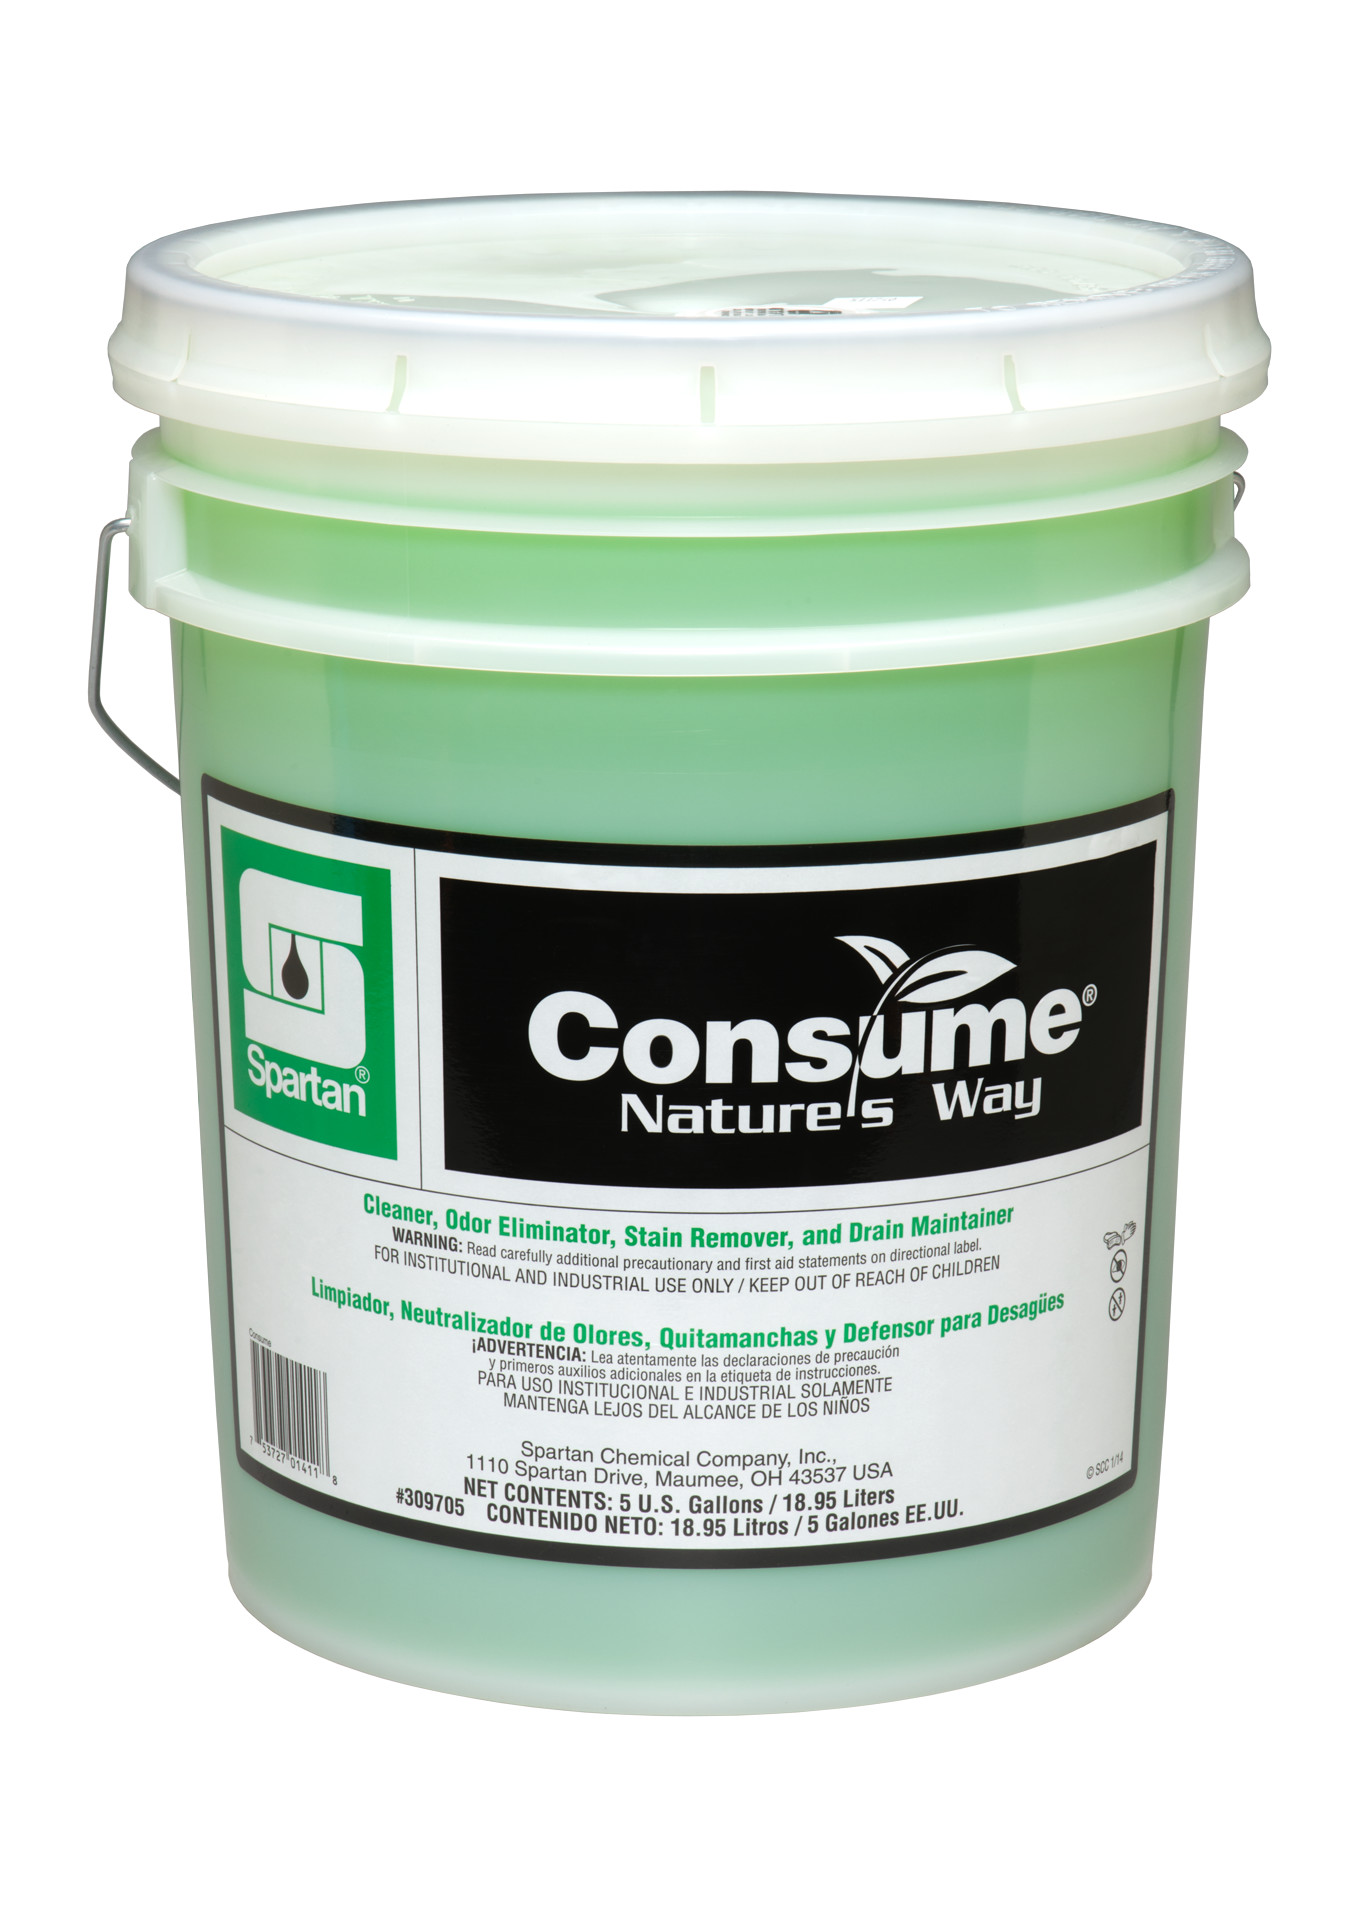 Spartan Chemical Company Consume, 5 GAL PAIL